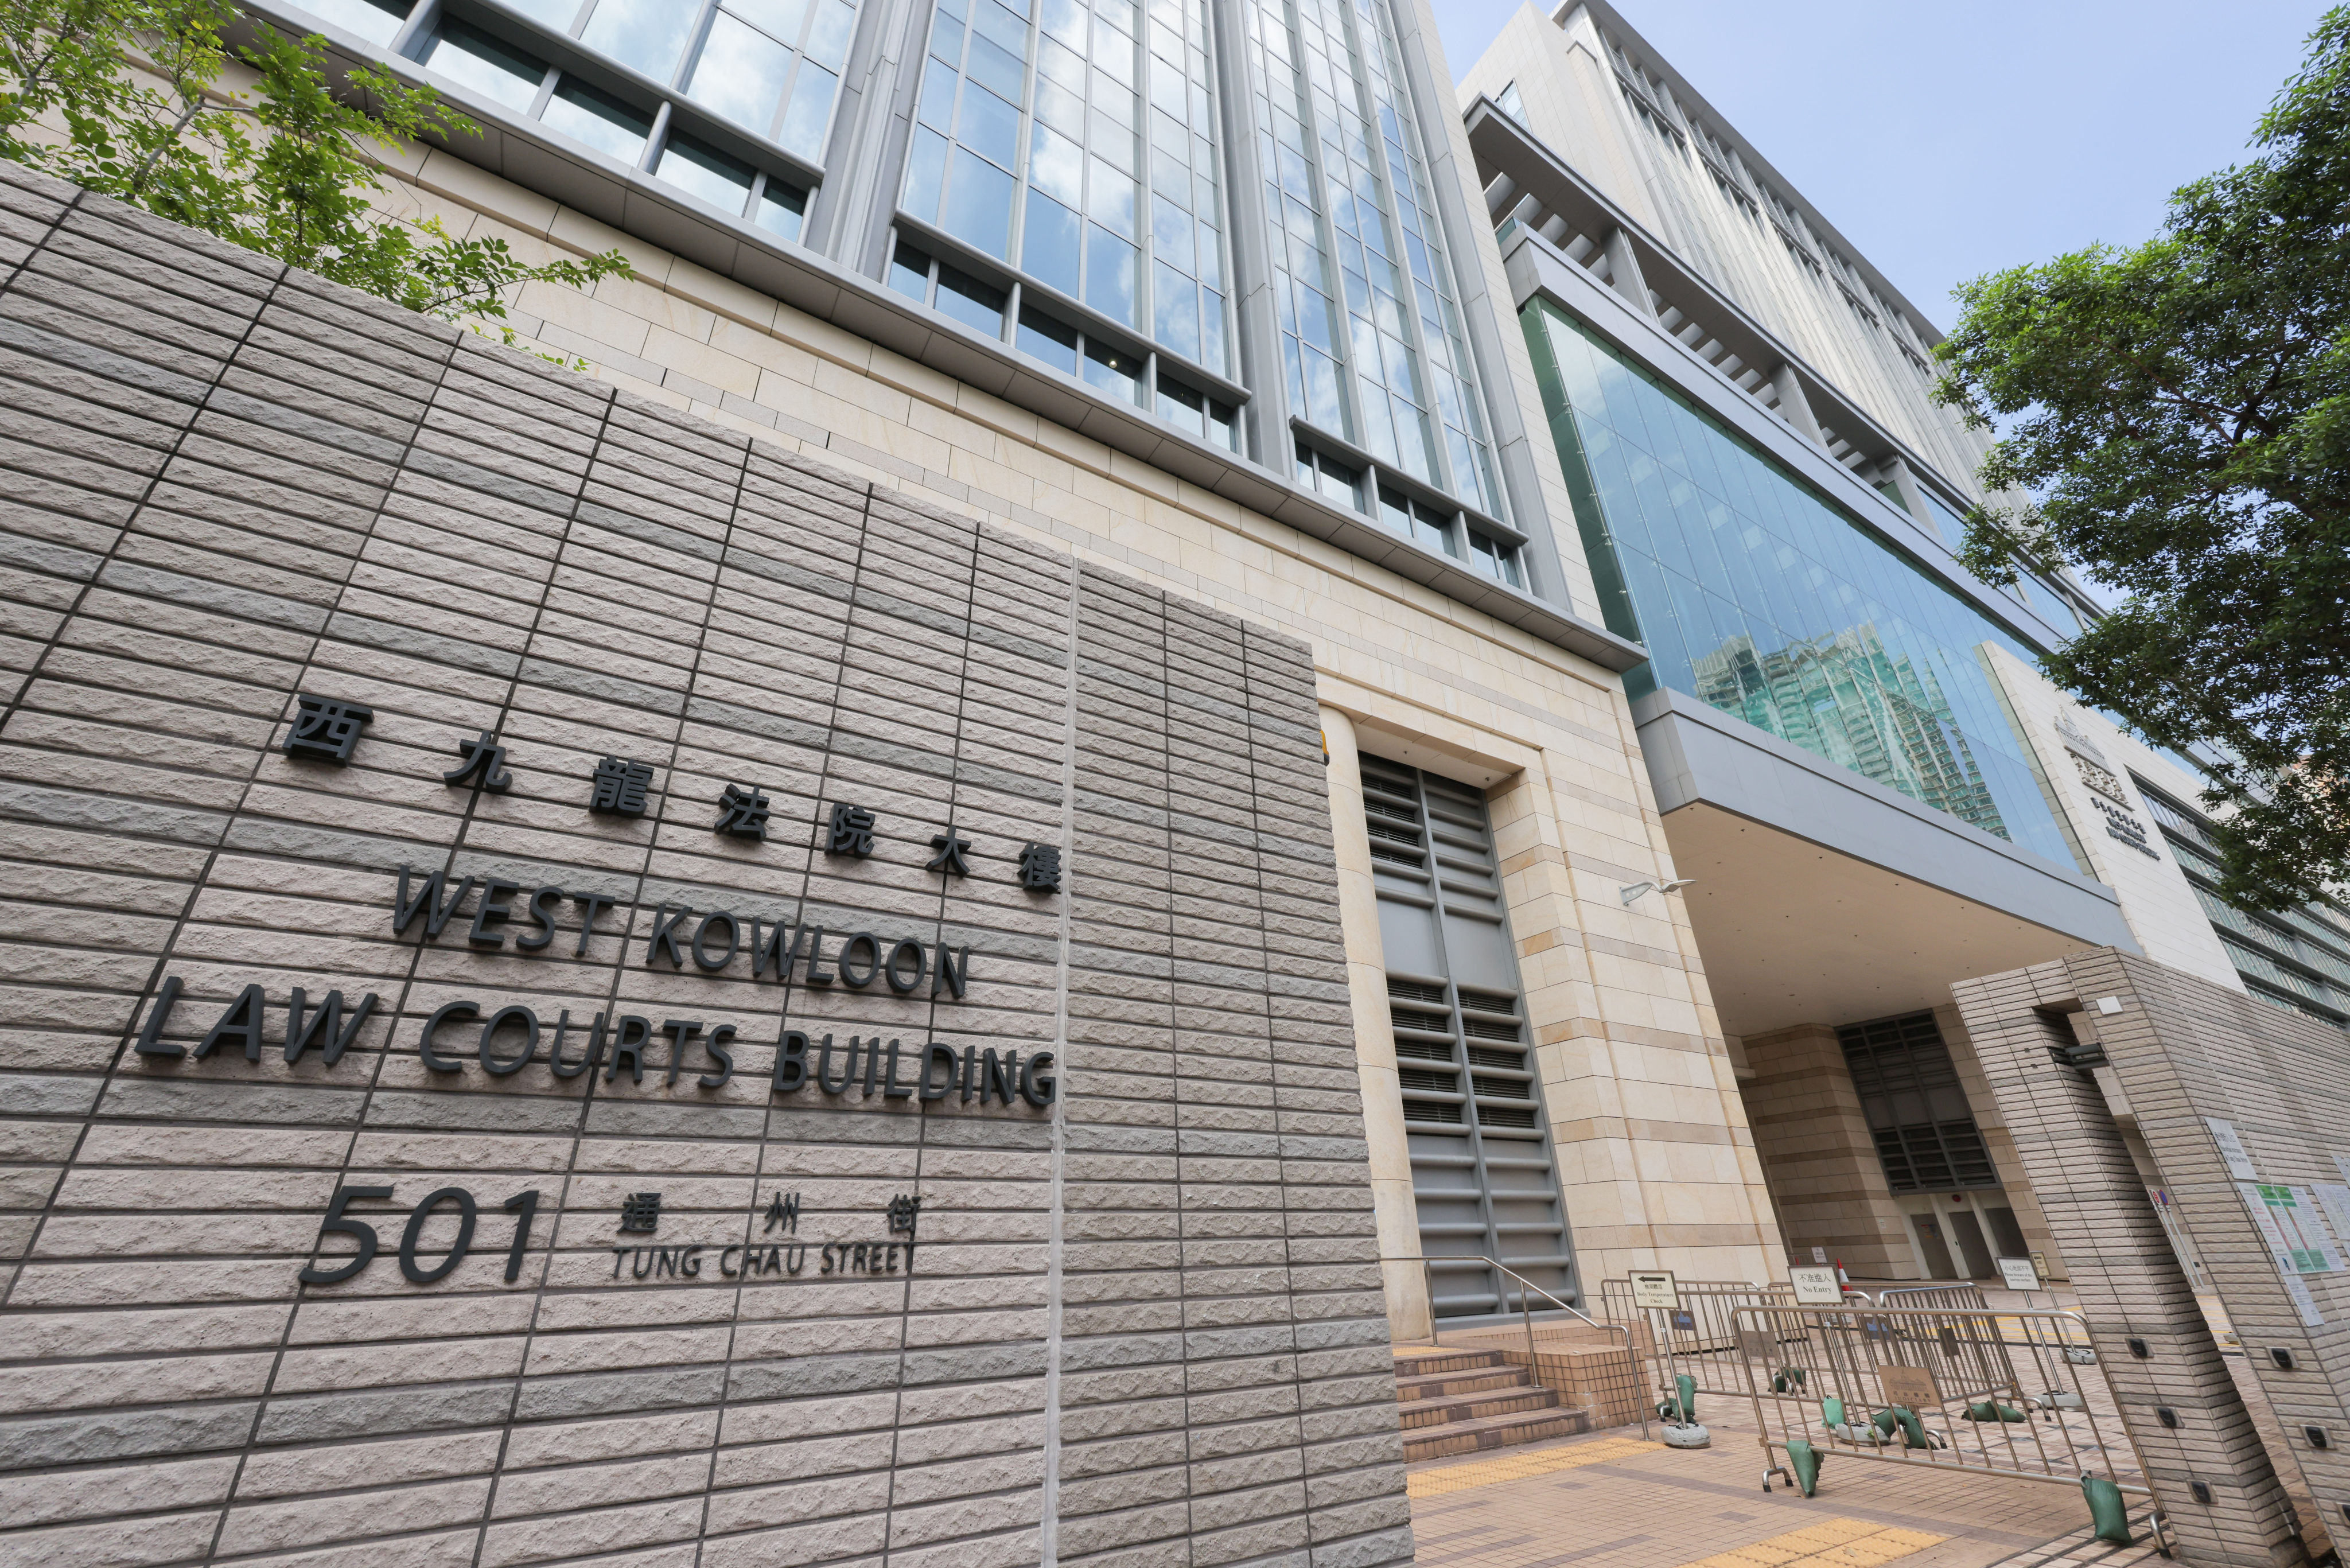 A single mother was sentenced to probation for 1½ years at the West Kowloon Court over the abuse of her eight-year-old son. Photo: Jelly Tse